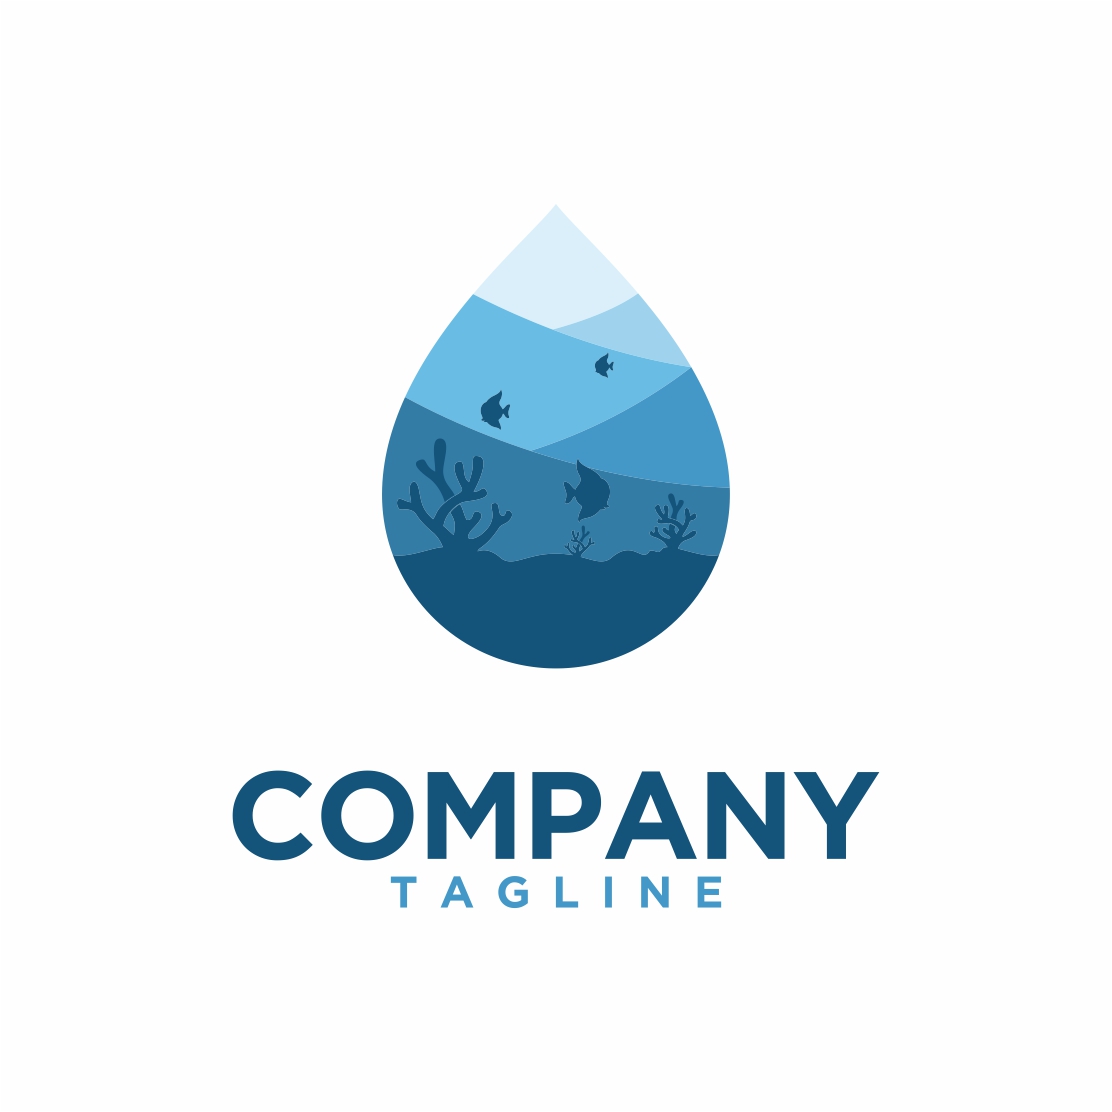 Coral reef tourism logo design template, water tourism logo - only 7$ preview image.